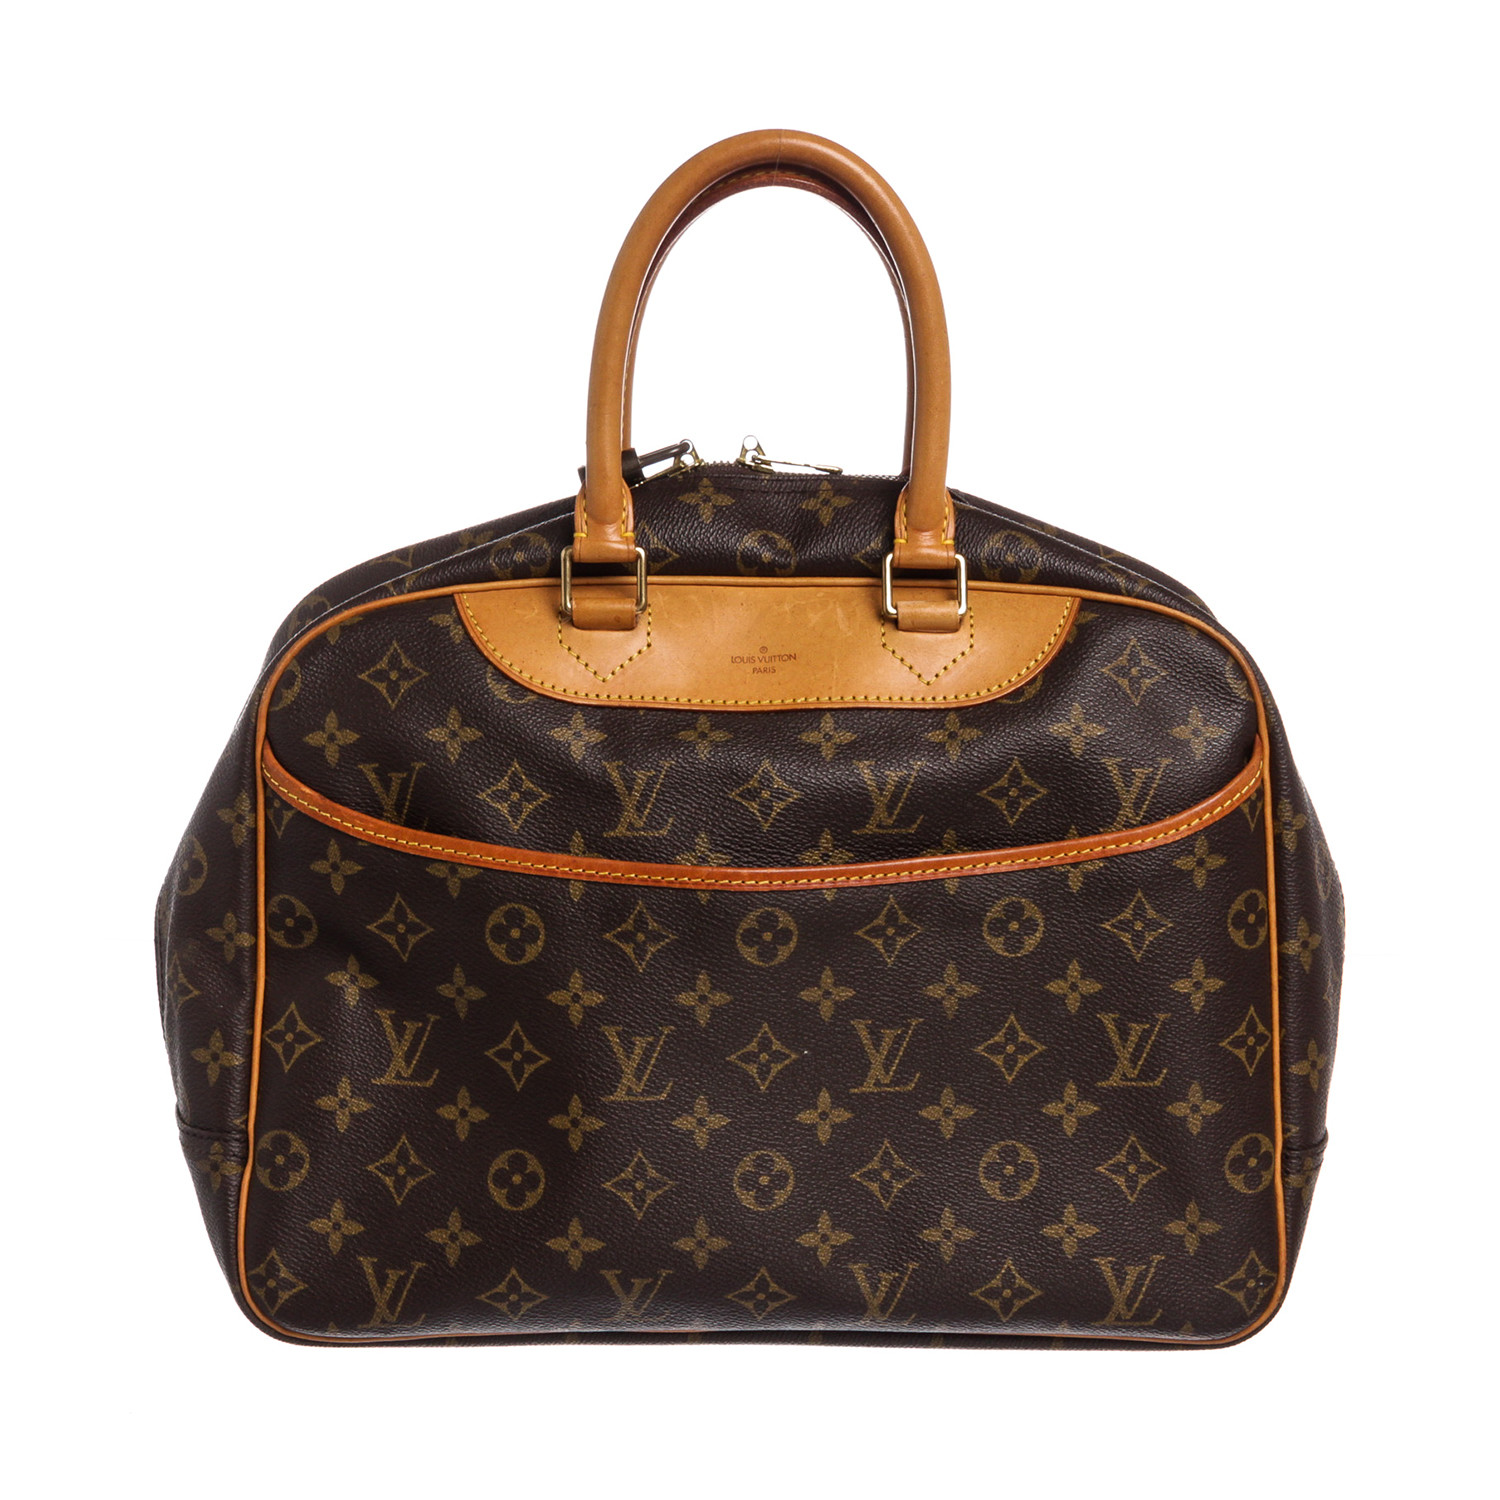 Are Gucci And Louis Vuitton Owned By The Same Company